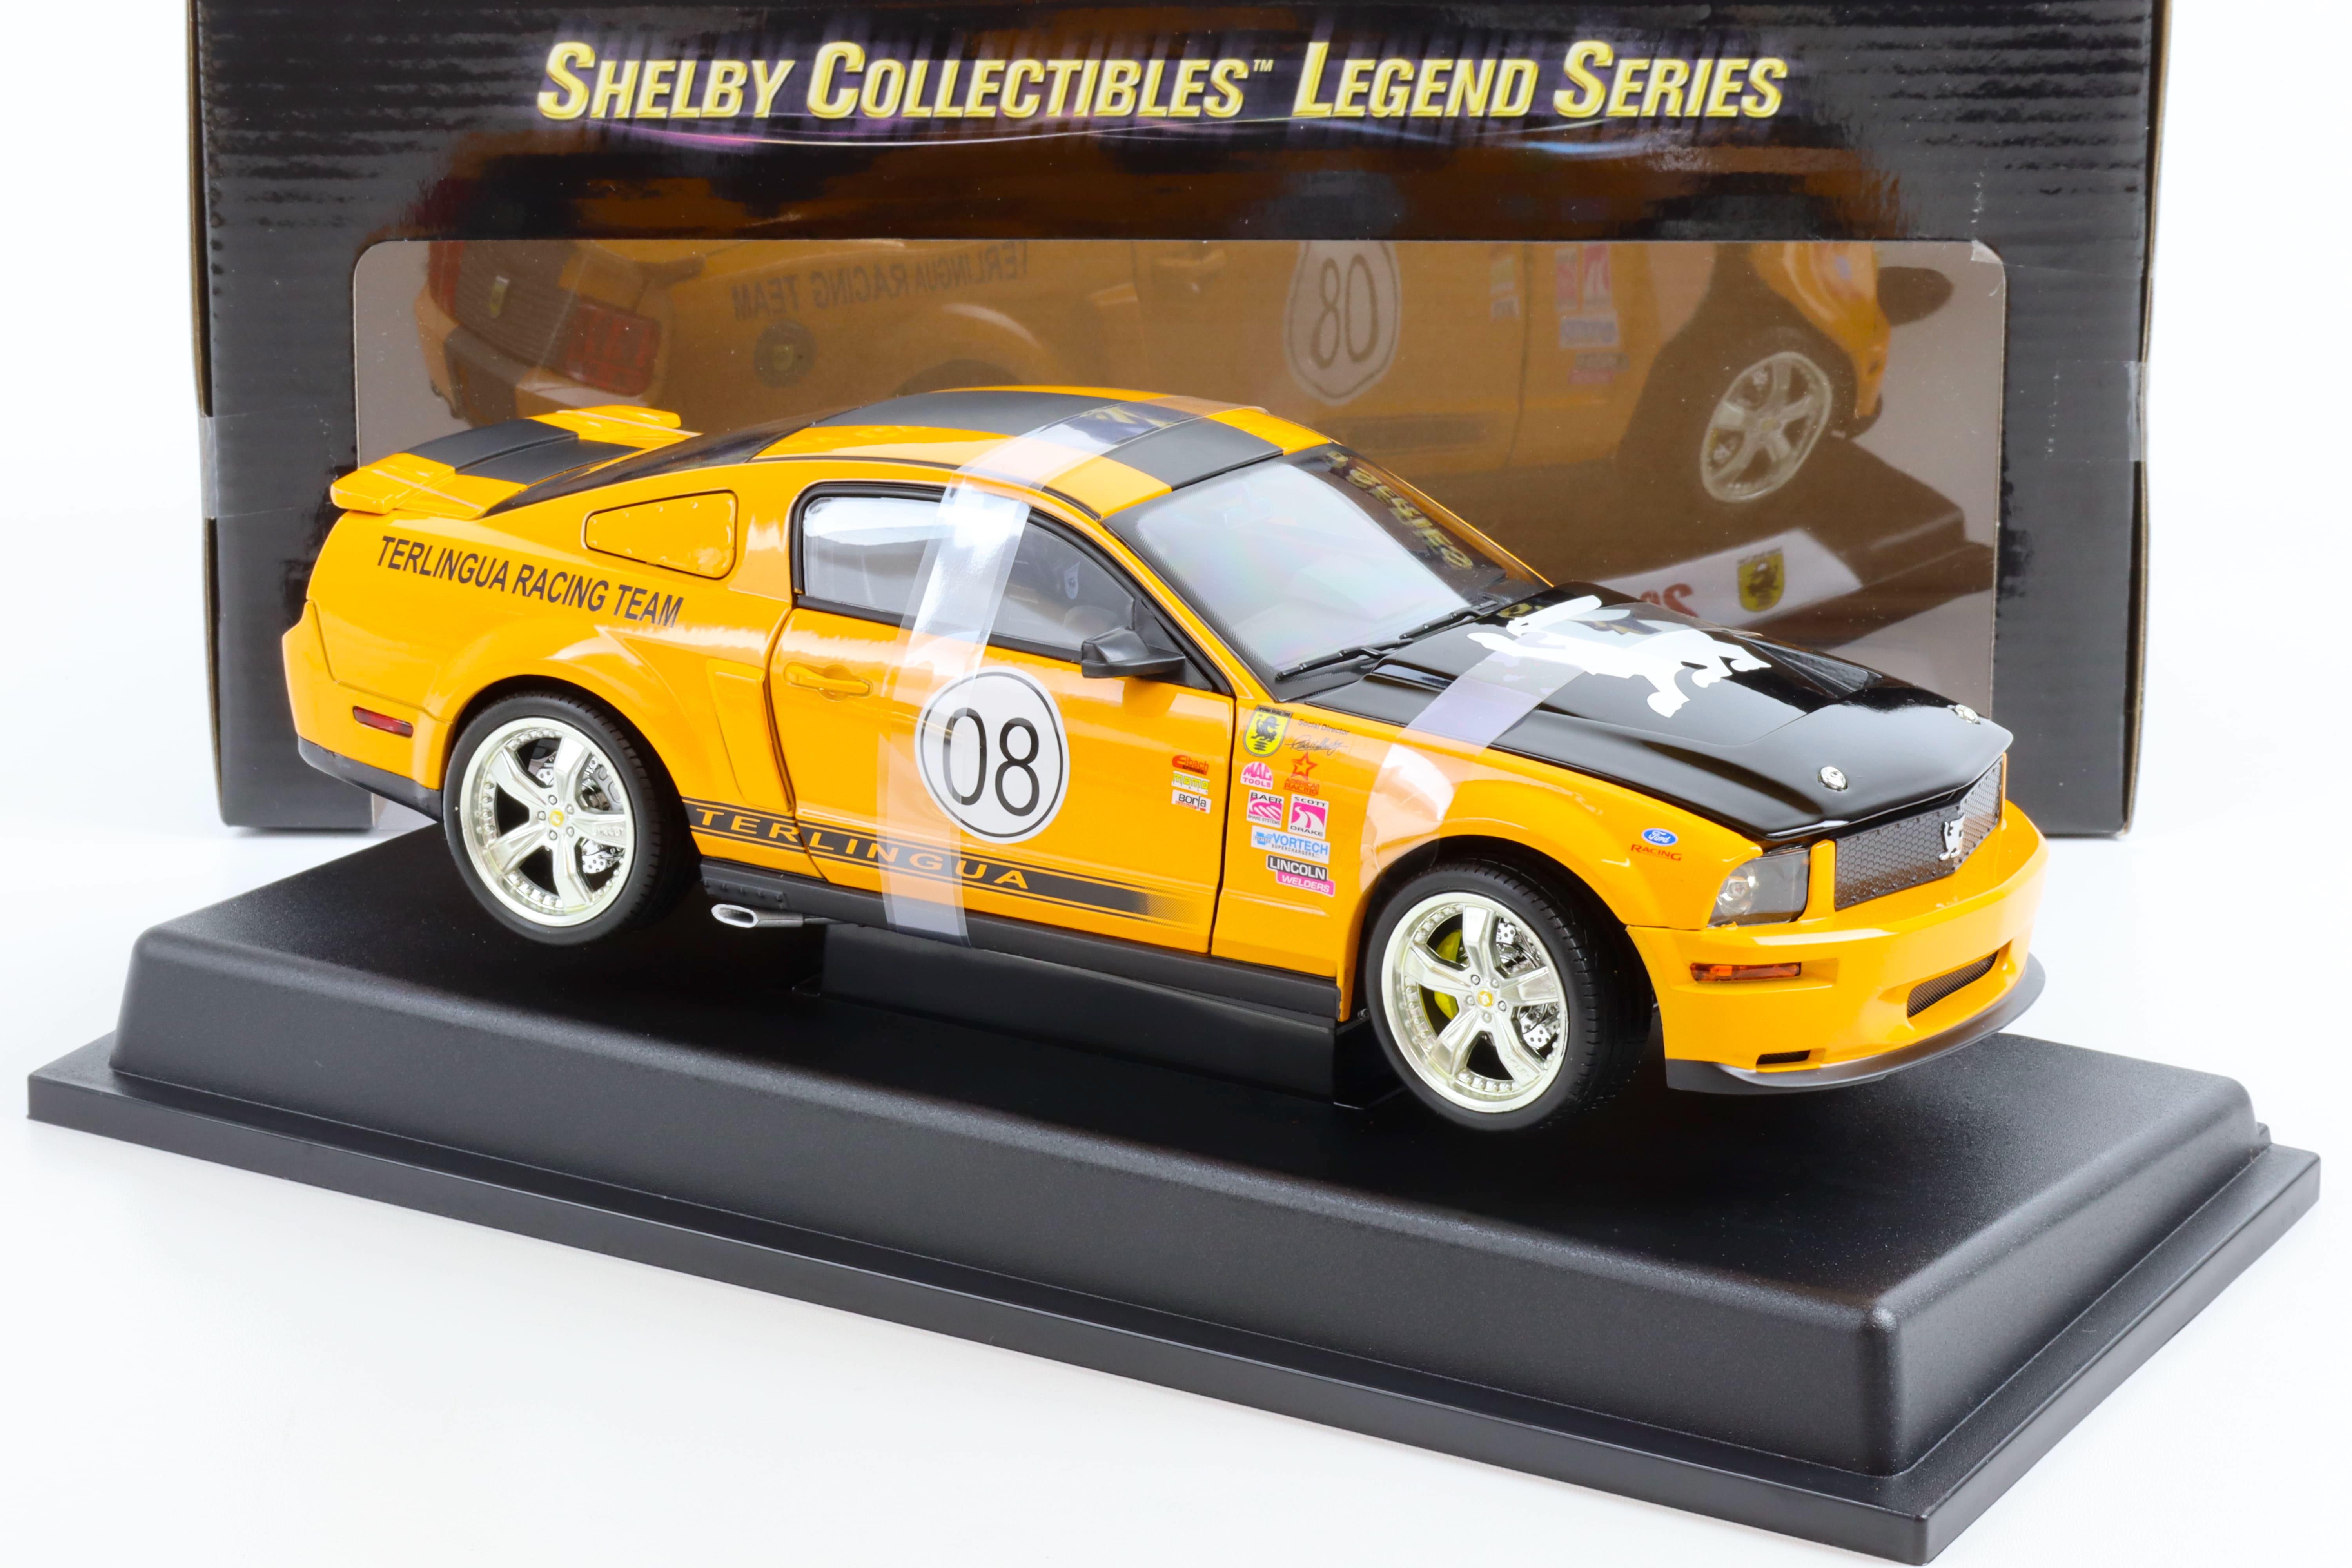 1:18 Shelby Collectibles 2008 Shelby Mustang TERLINGUA #08 grabber orange/ black